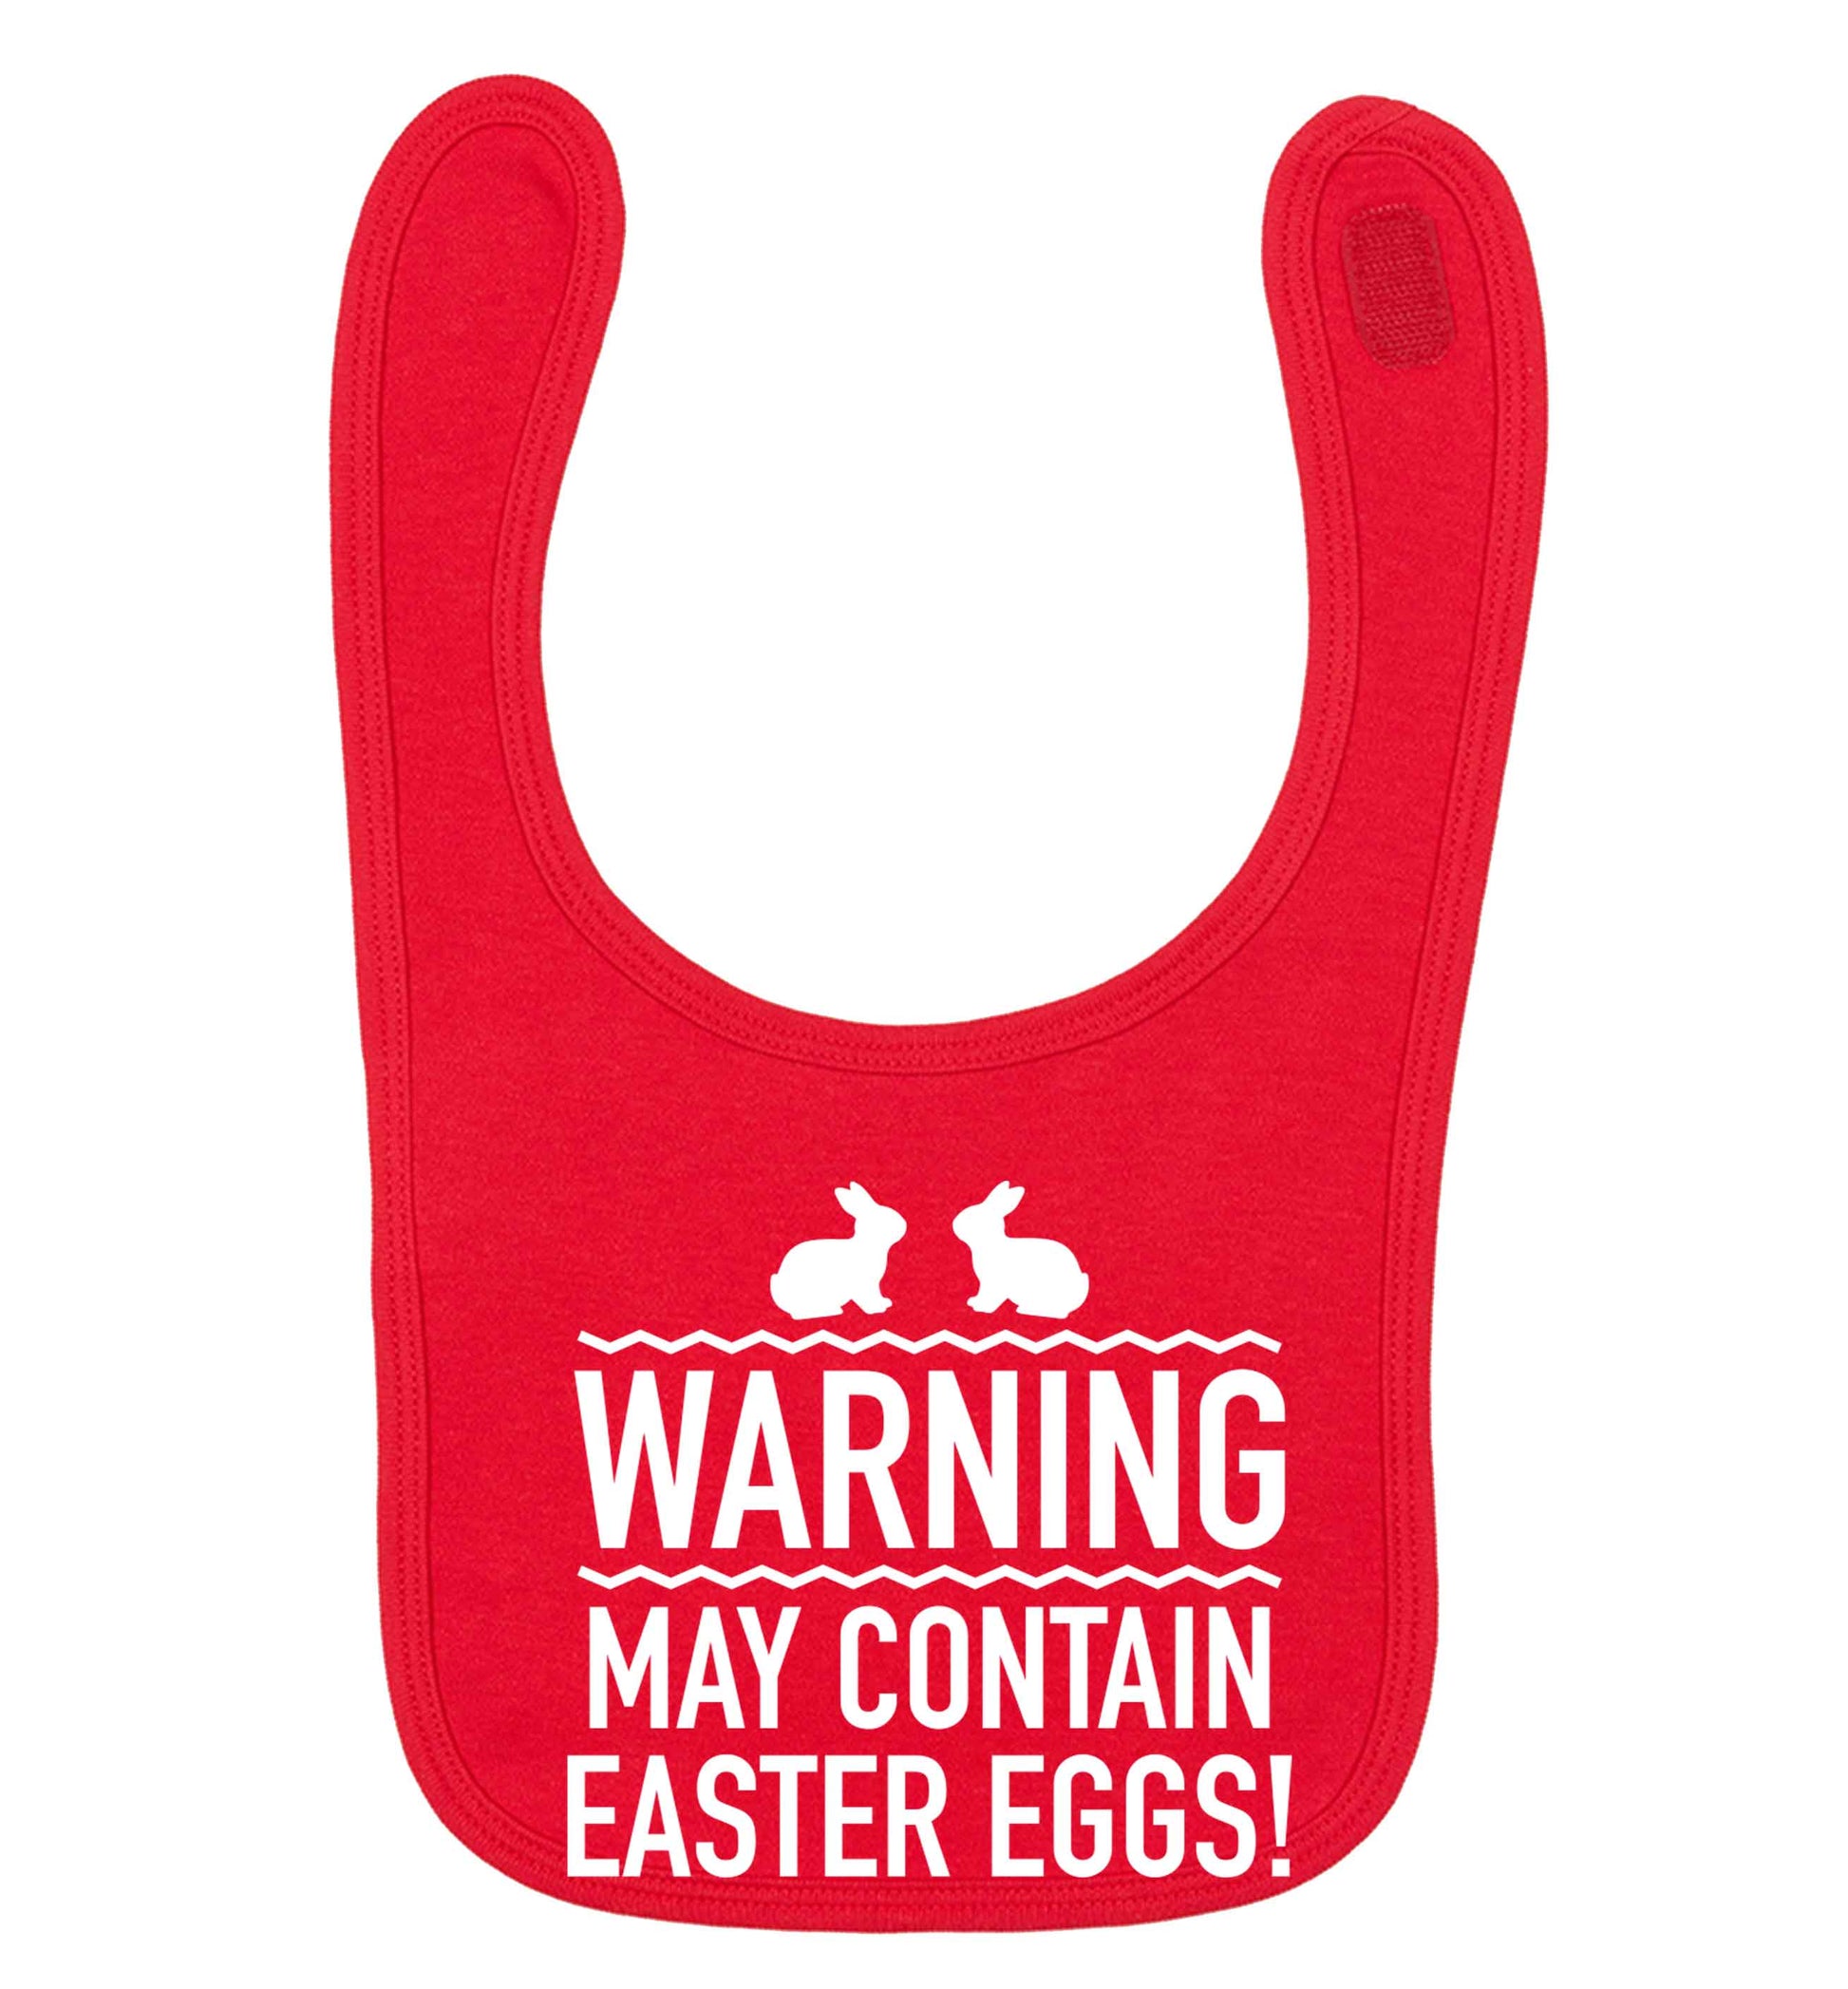 Warning may contain Easter eggs red baby bib